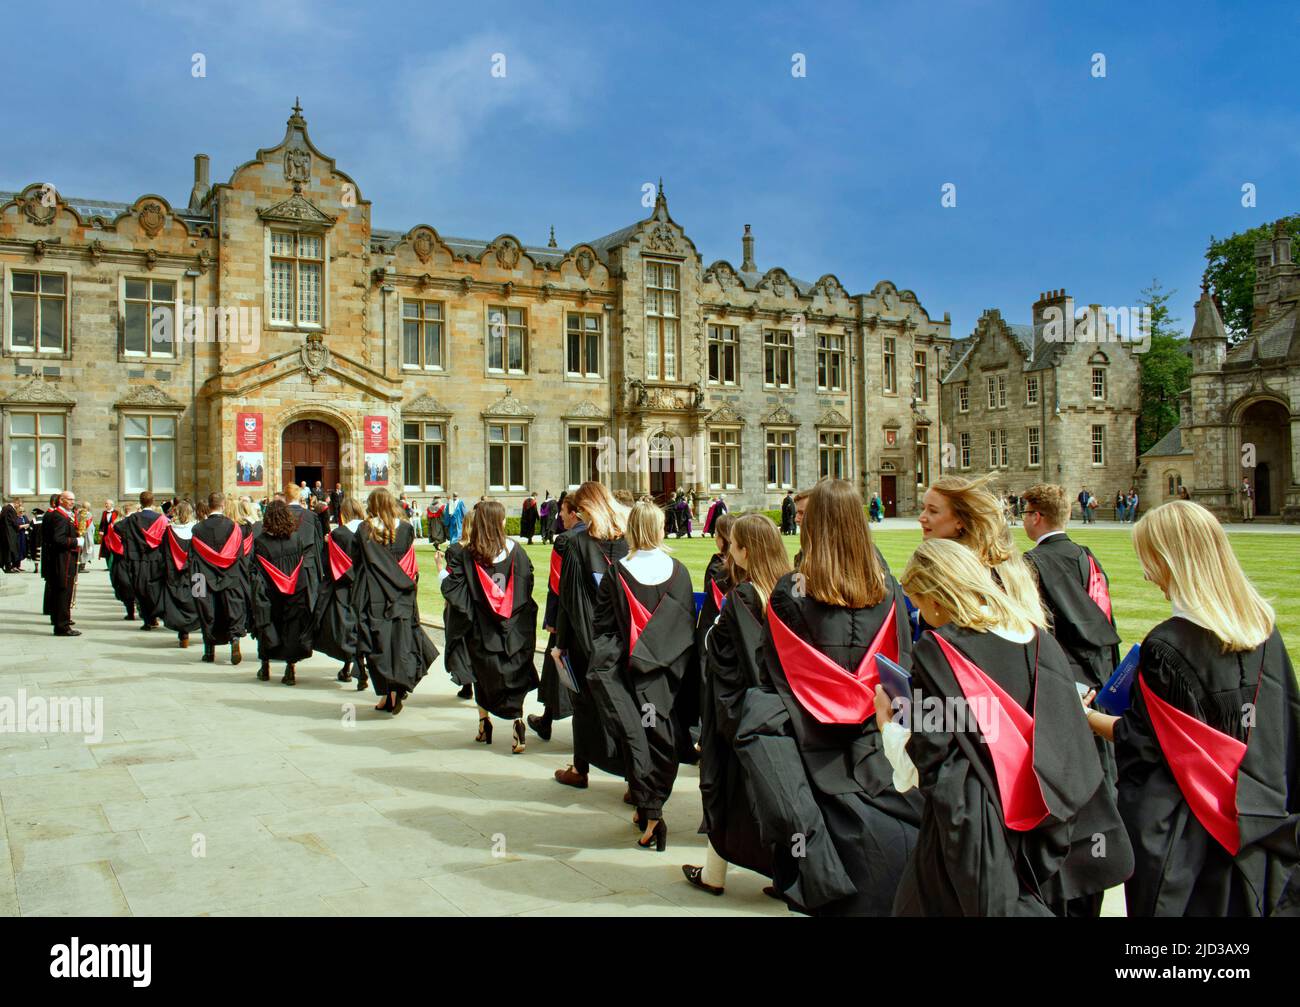 ST ANDREWS UNIVERSITY SCOTLAND GRADUATION DAY ST SALVATORS QUAD PROCESSION  OF GRADUATES WITH BLACK AND RED ACADEMIC GOWNS Stock Photo - Alamy